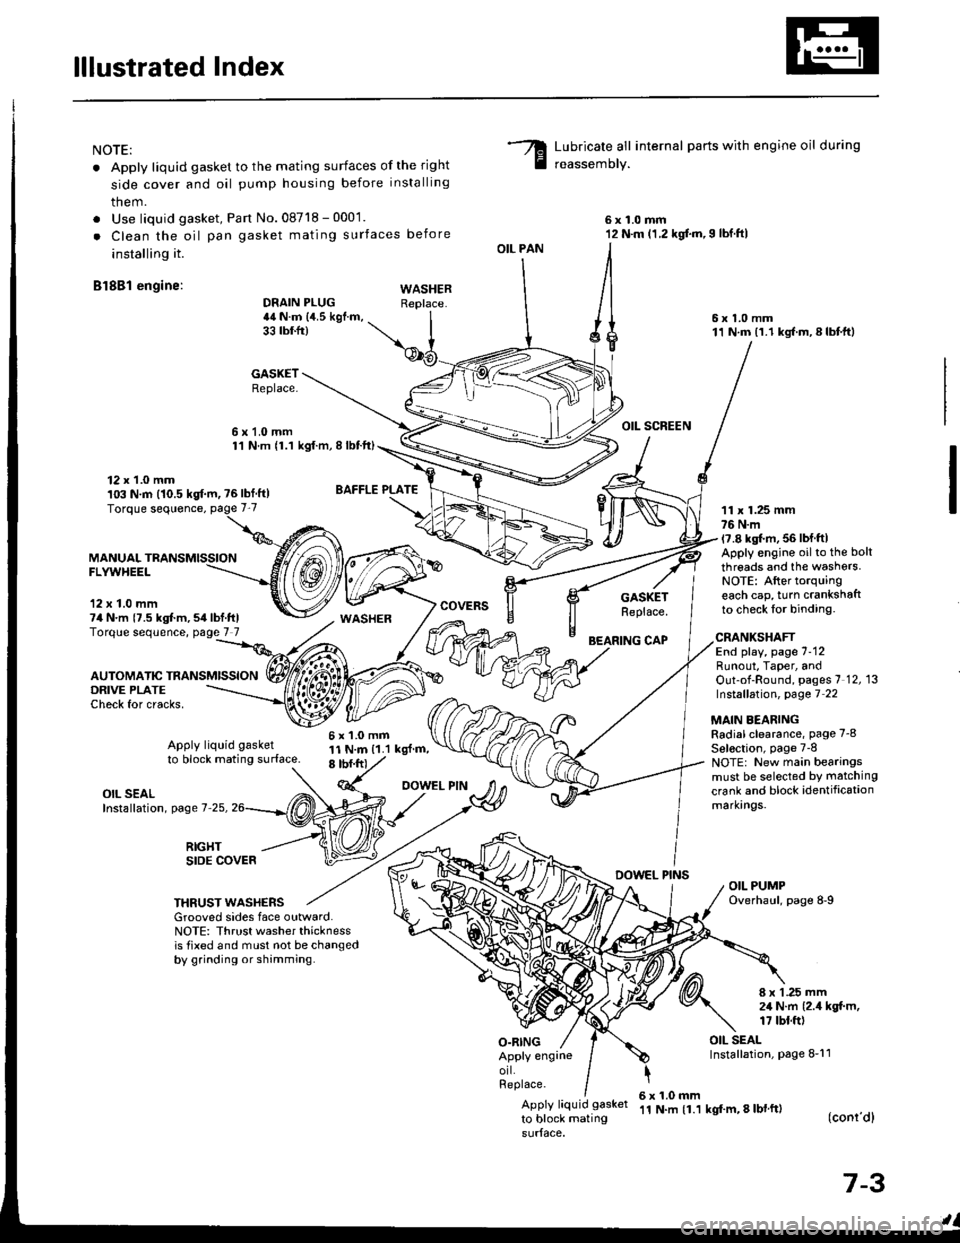 HONDA INTEGRA 1994 4.G Workshop Manual lllustrated Index
NOTE:
. Apply liquid gasket to the mating surfaces of the right
side cover and oil pump housing before installing
them.
. Use liquid gasket, Pan No.08718 - 0001.
. Clean the oil pan 